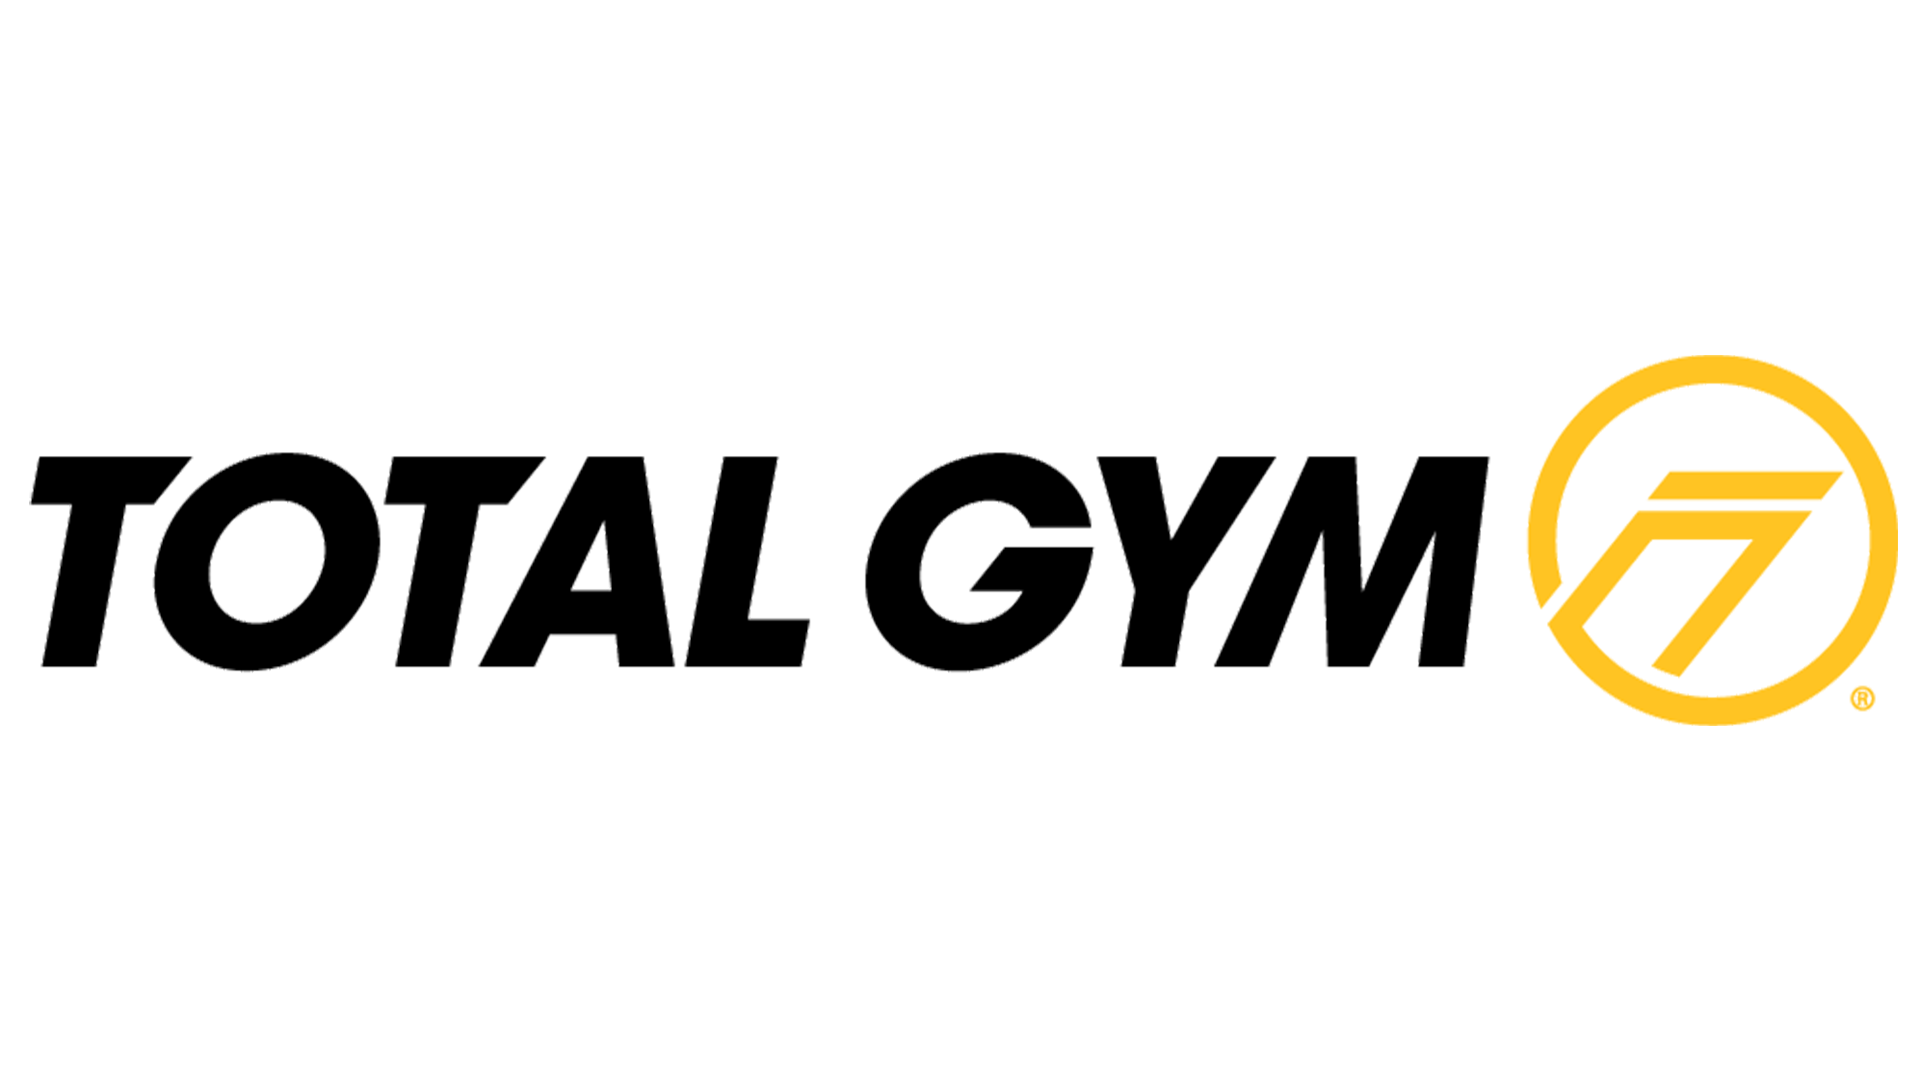 A black and white logo of total gym